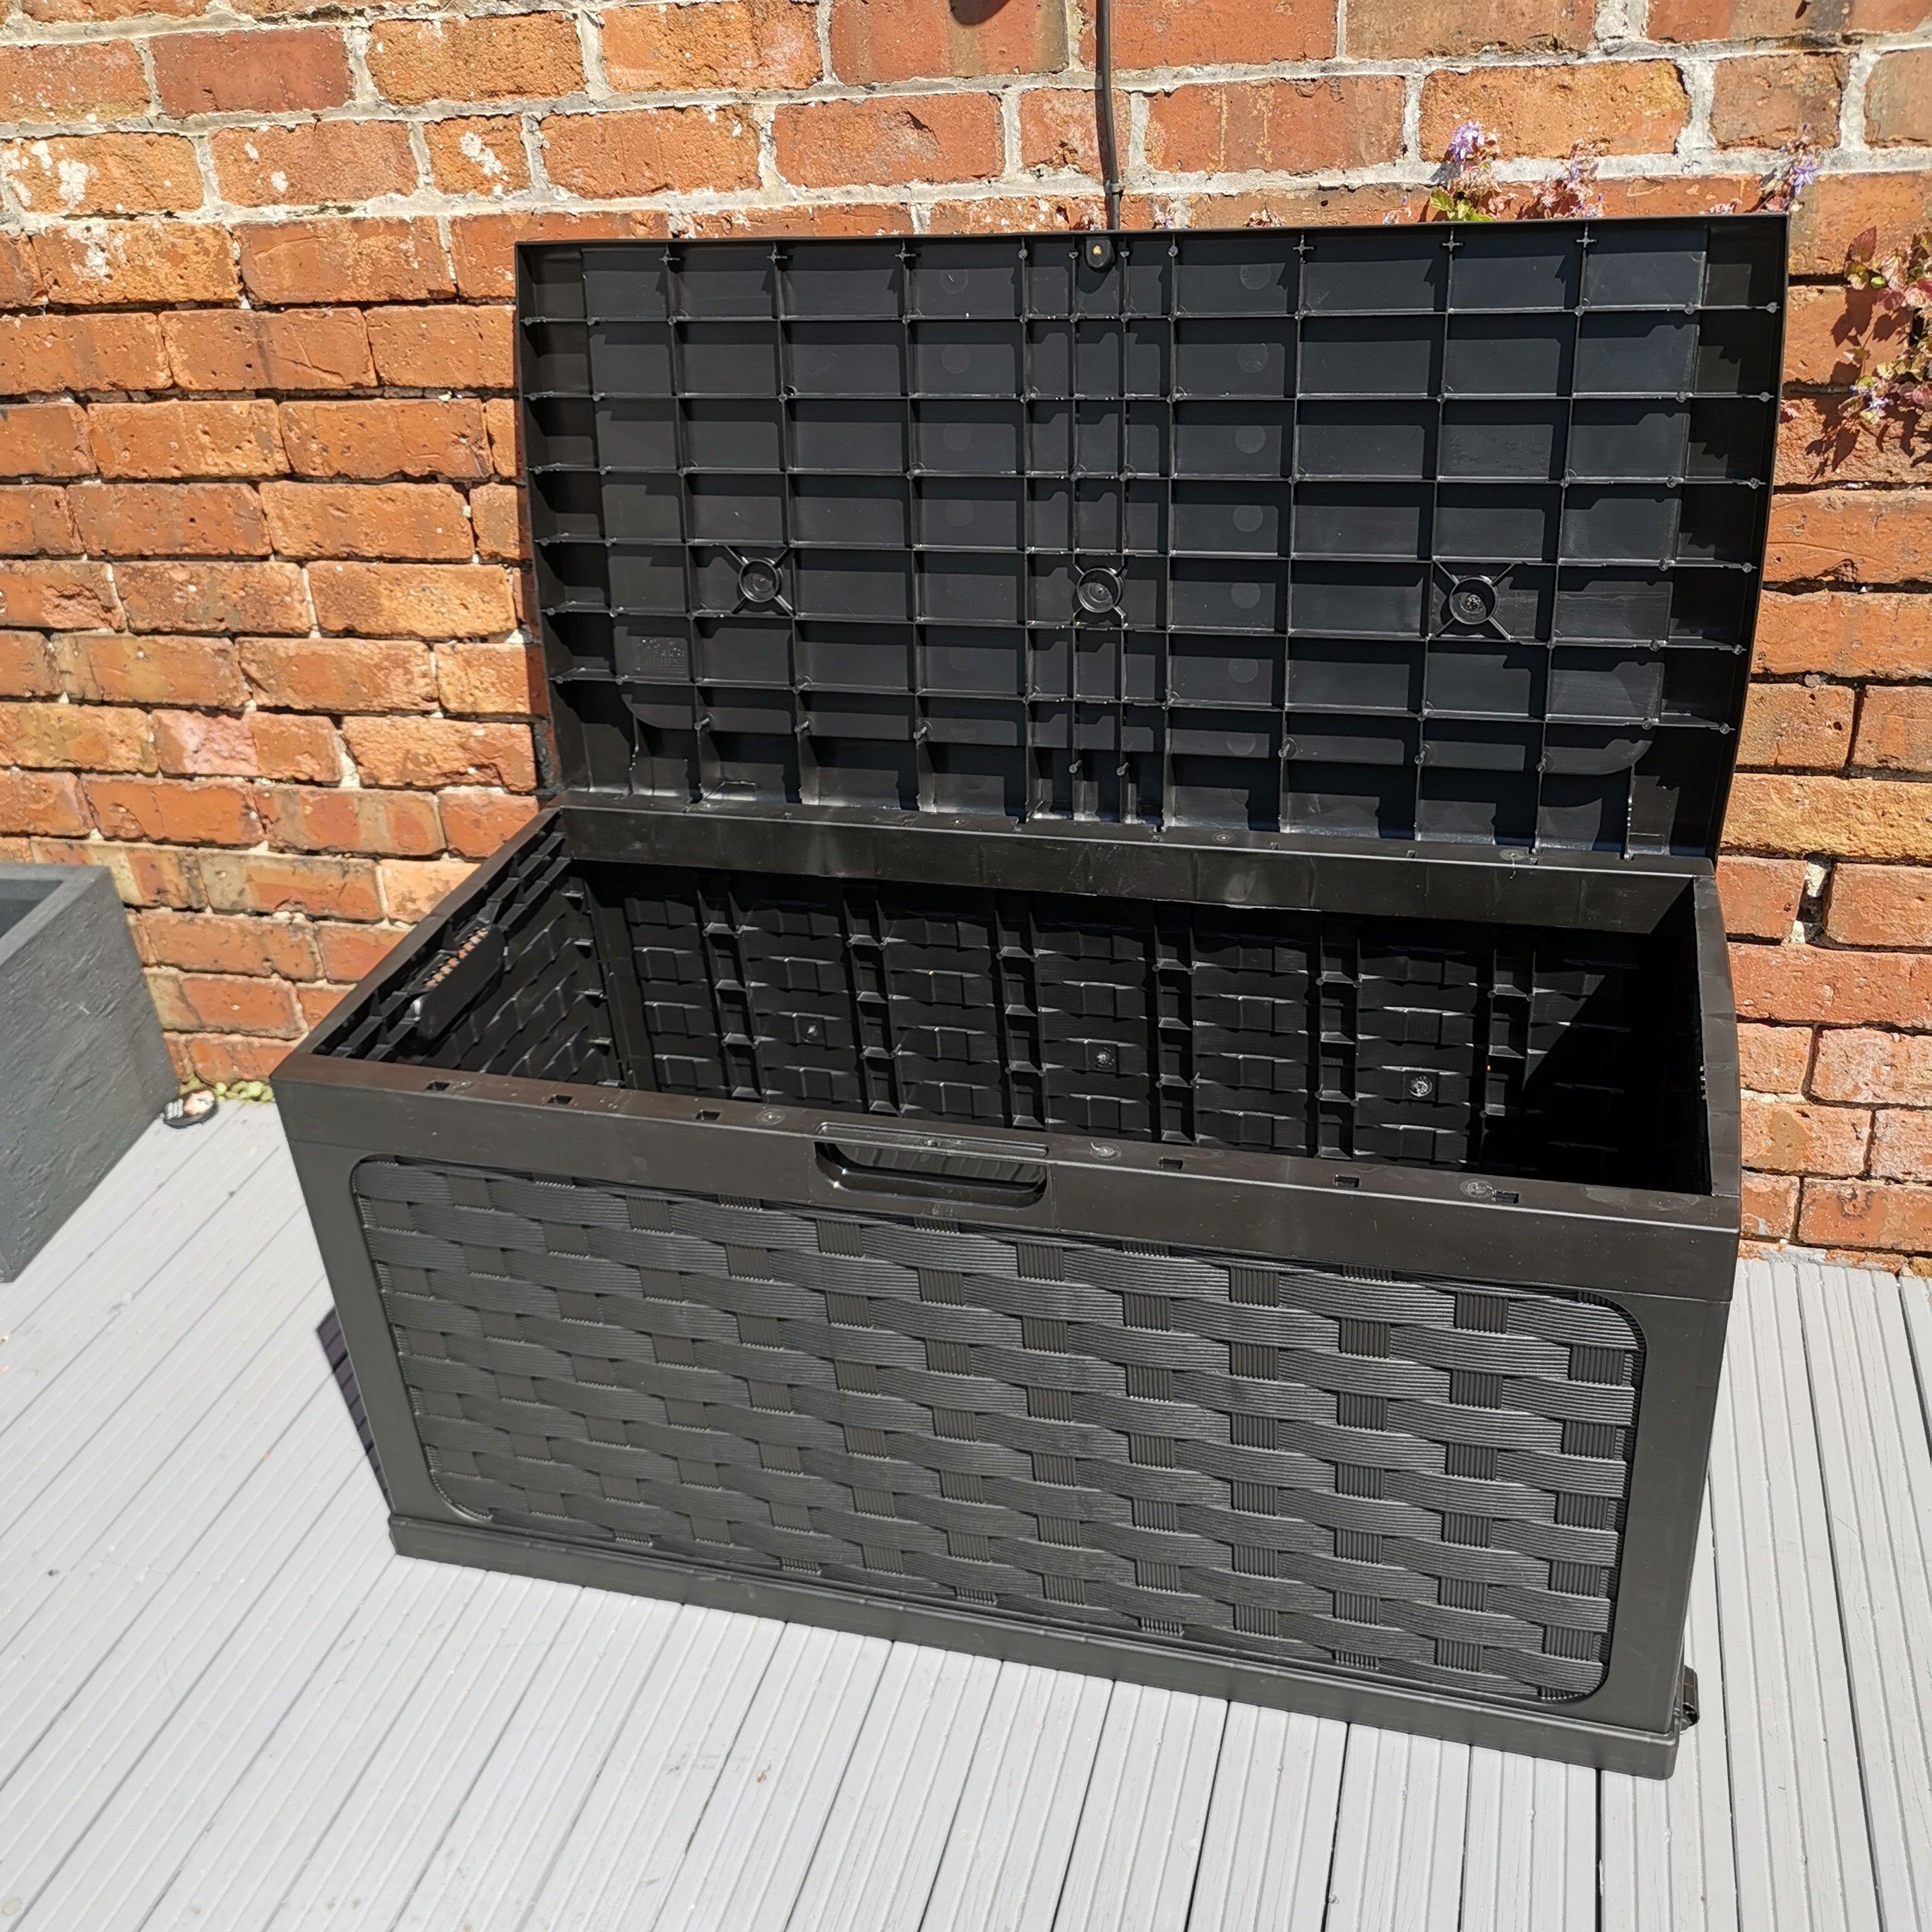 335 Litre Rattan Style Garden Cushion Storage Box with Sit on Lid - Black